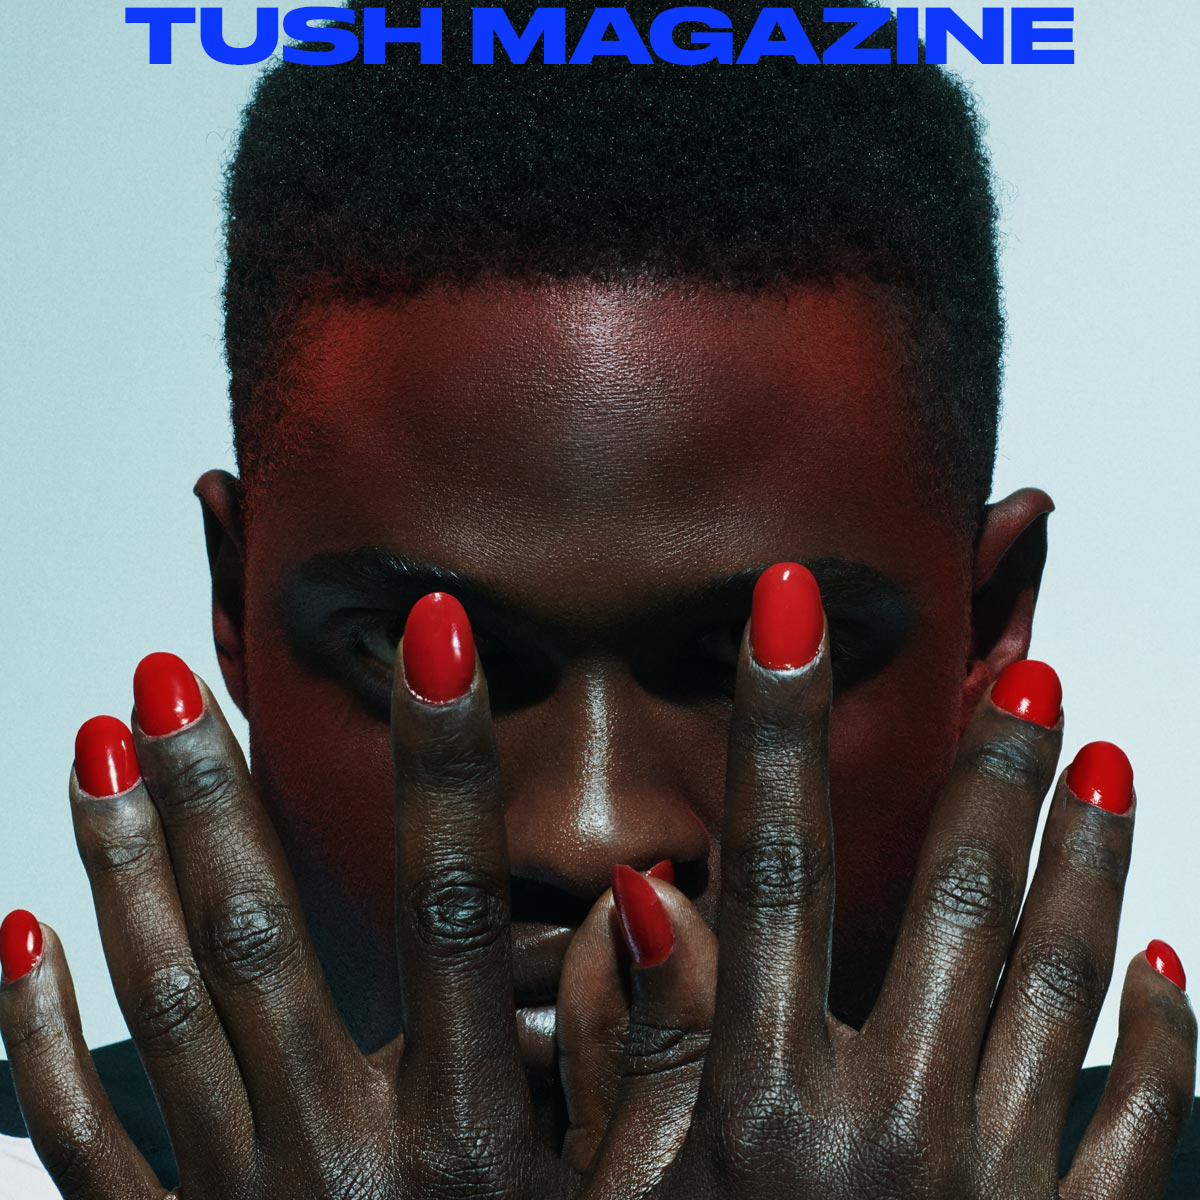 A complete backup of tushmagazine.com